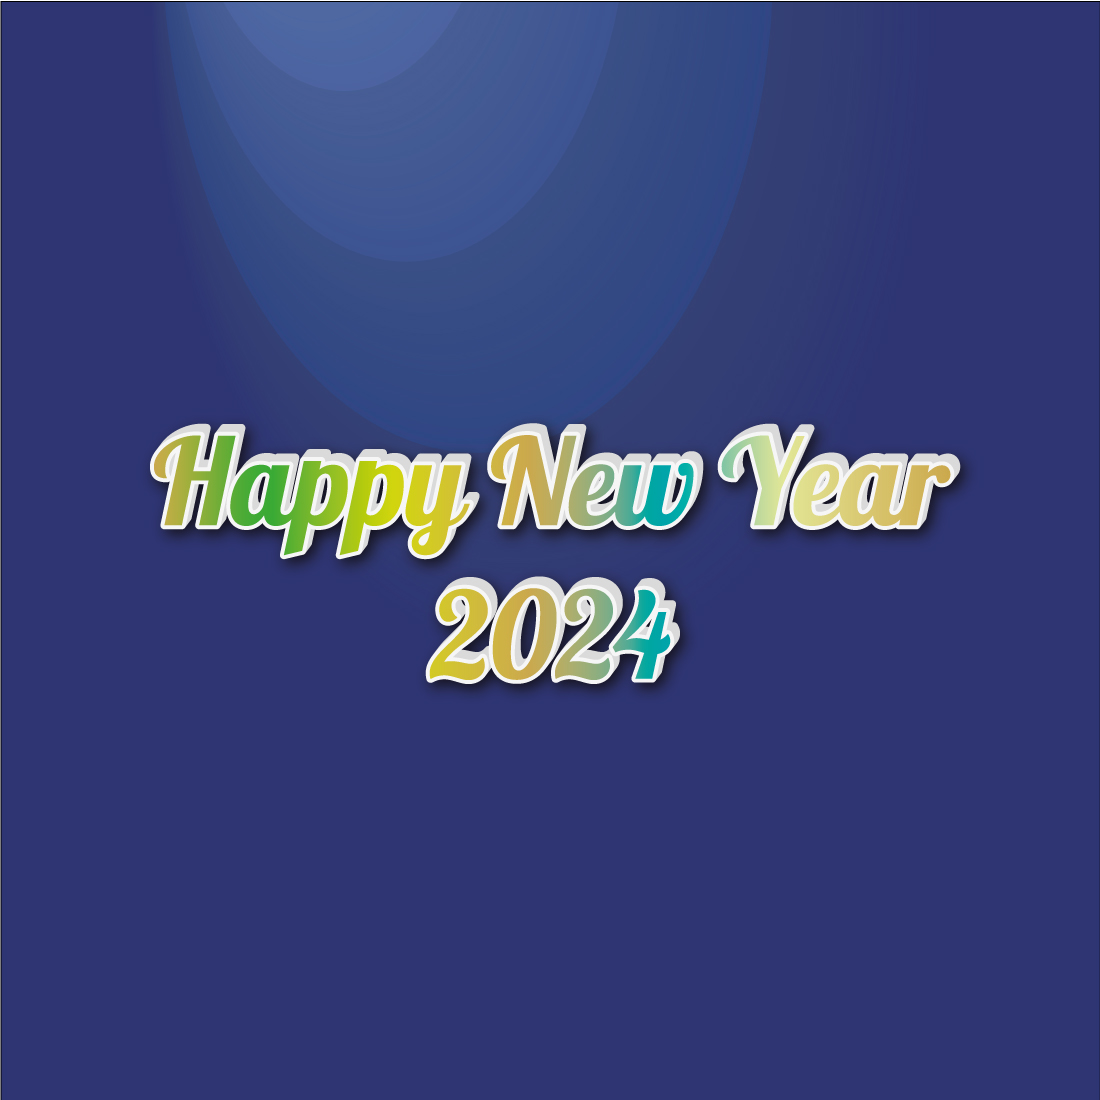 Happy New Year 3d letters, 2024 3d text effect, text effect, 3d text